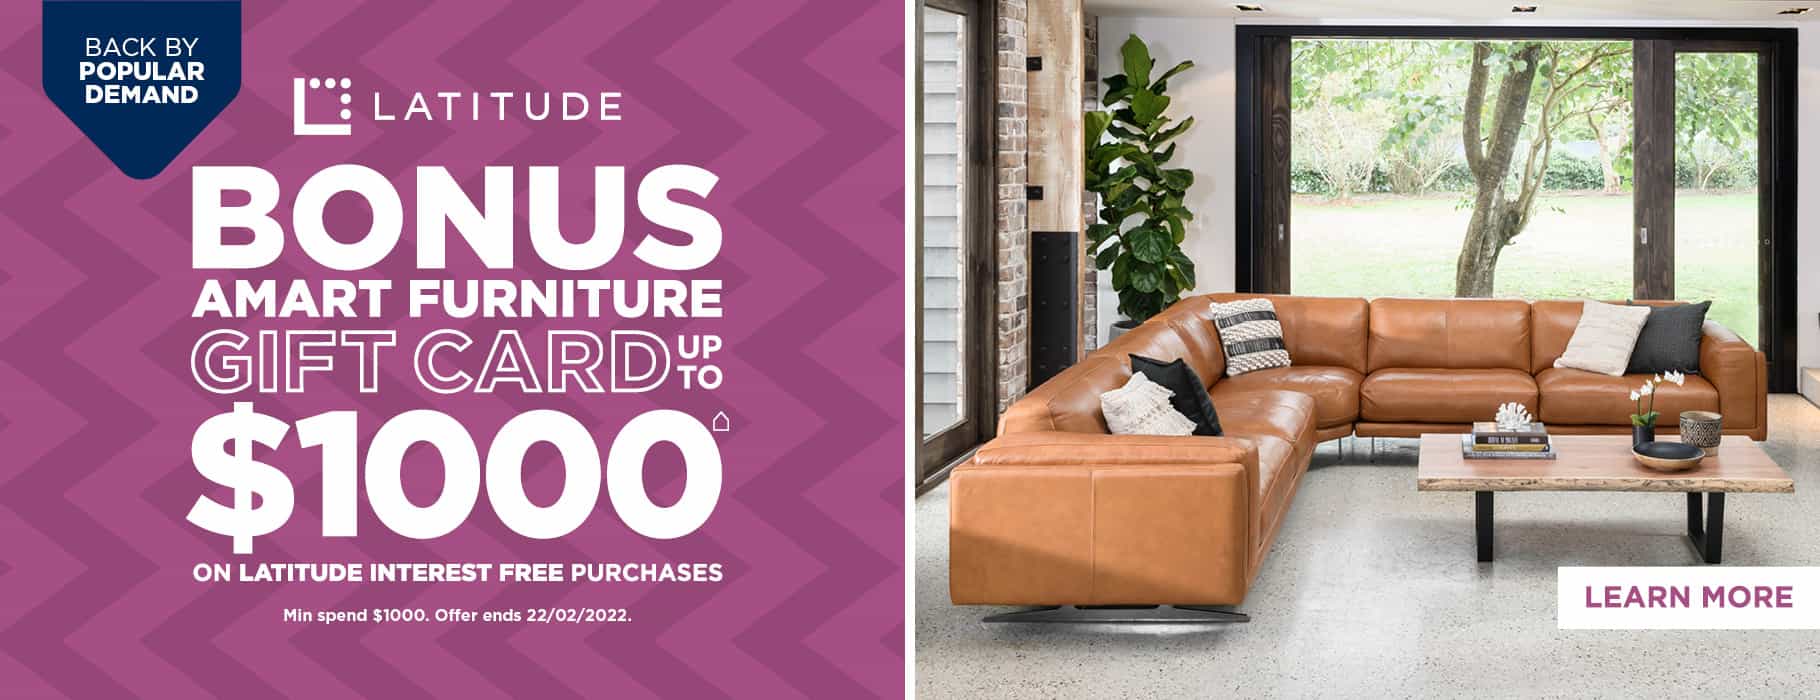 Amart Furniture Bonus up to $1000 gift card on Latitude Interest free purchases(min. spend $1000)